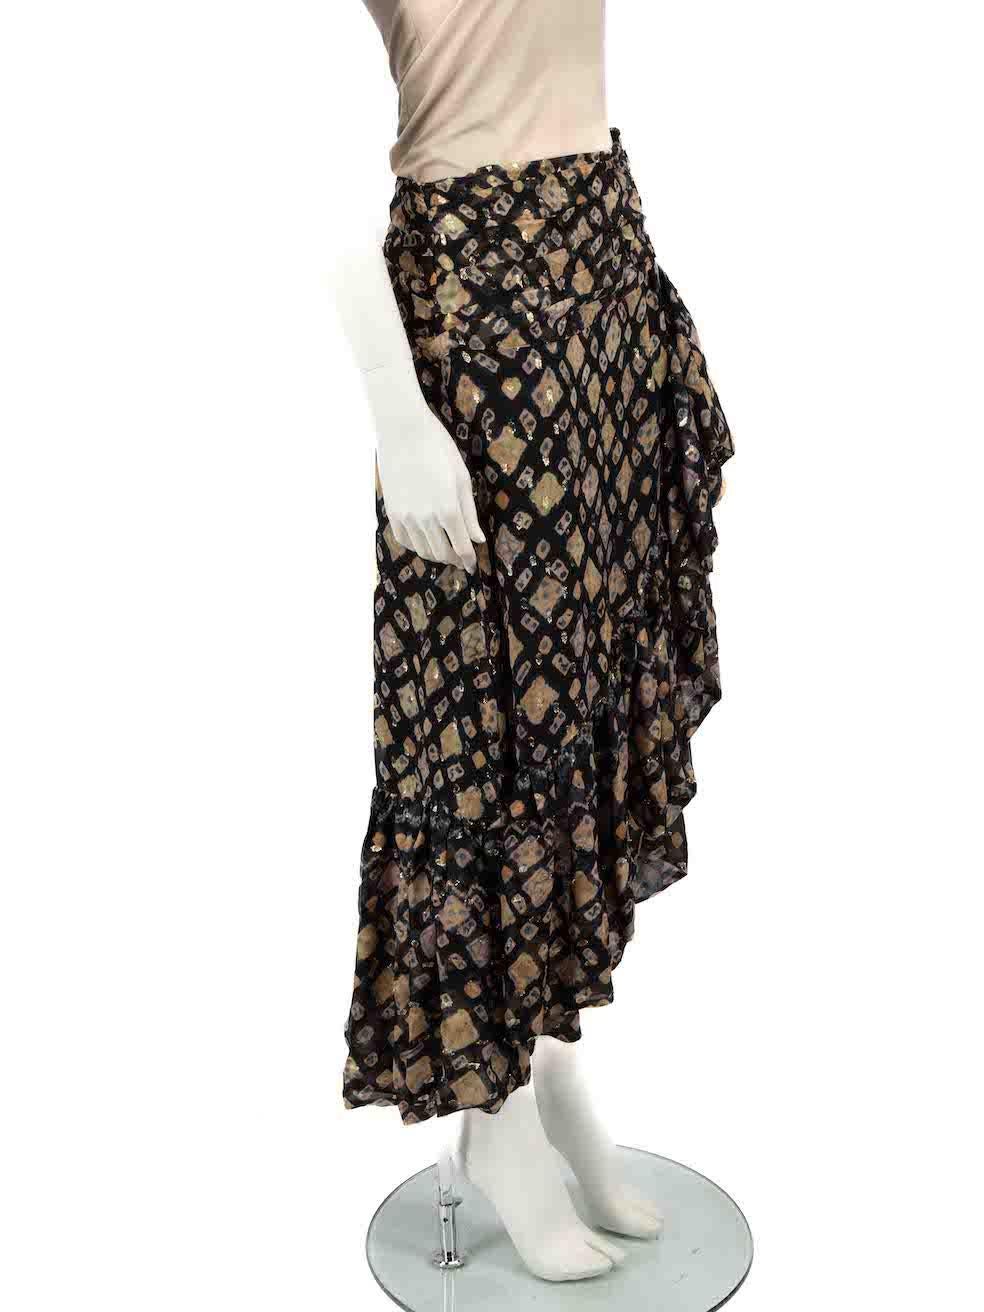 CONDITION is Very good. Hardly any visible wear to skirt is evident on this used Ulla Johnson designer resale item.
 
 
 
 Details
 
 
 Multicolour
 
 Silk
 
 Skirt
 
 Abstract pattern
 
 Midi
 
 Ruffle trim
 
 Side zip fastening
 
 
 
 
 
 Made in